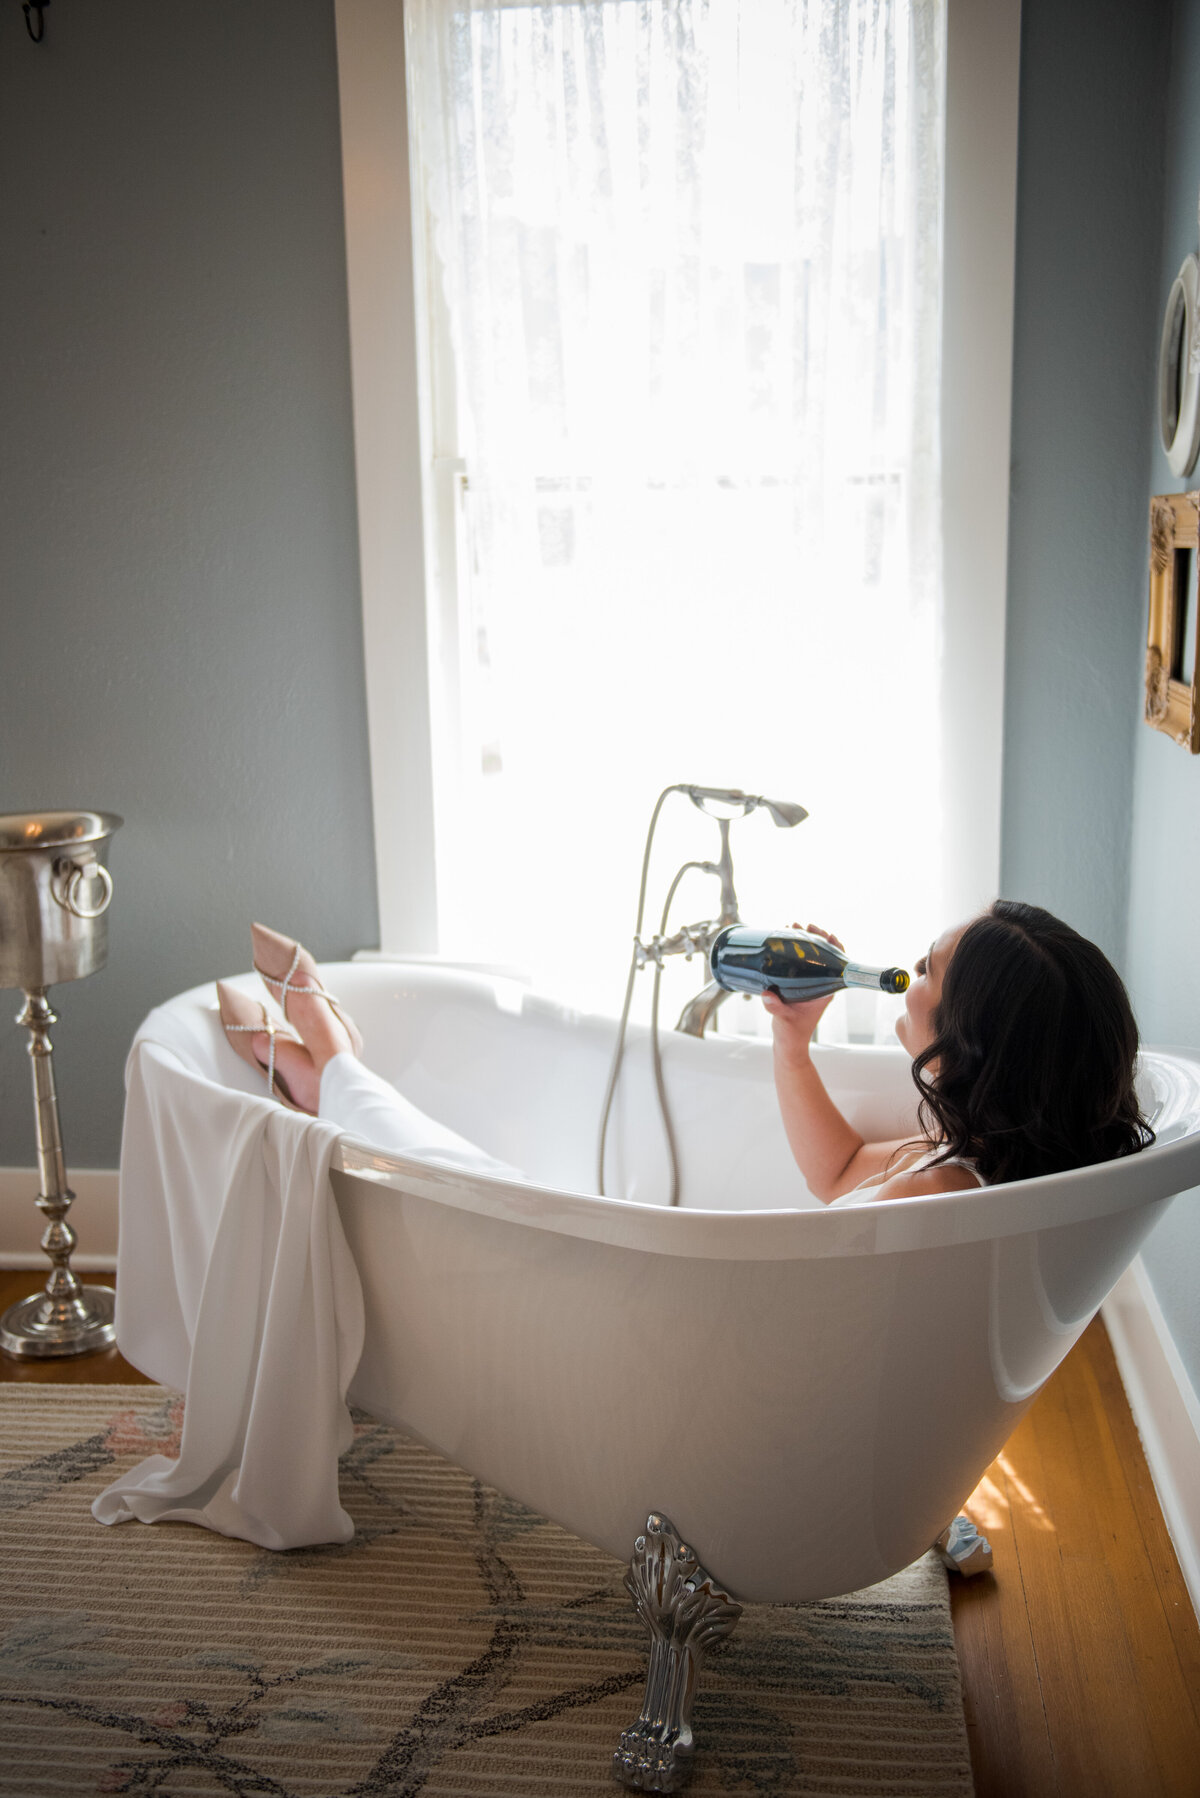 A playful shot of a bride sitting in a clawfoot bathtub in her wedding dress while sipping a bottle of champagne.